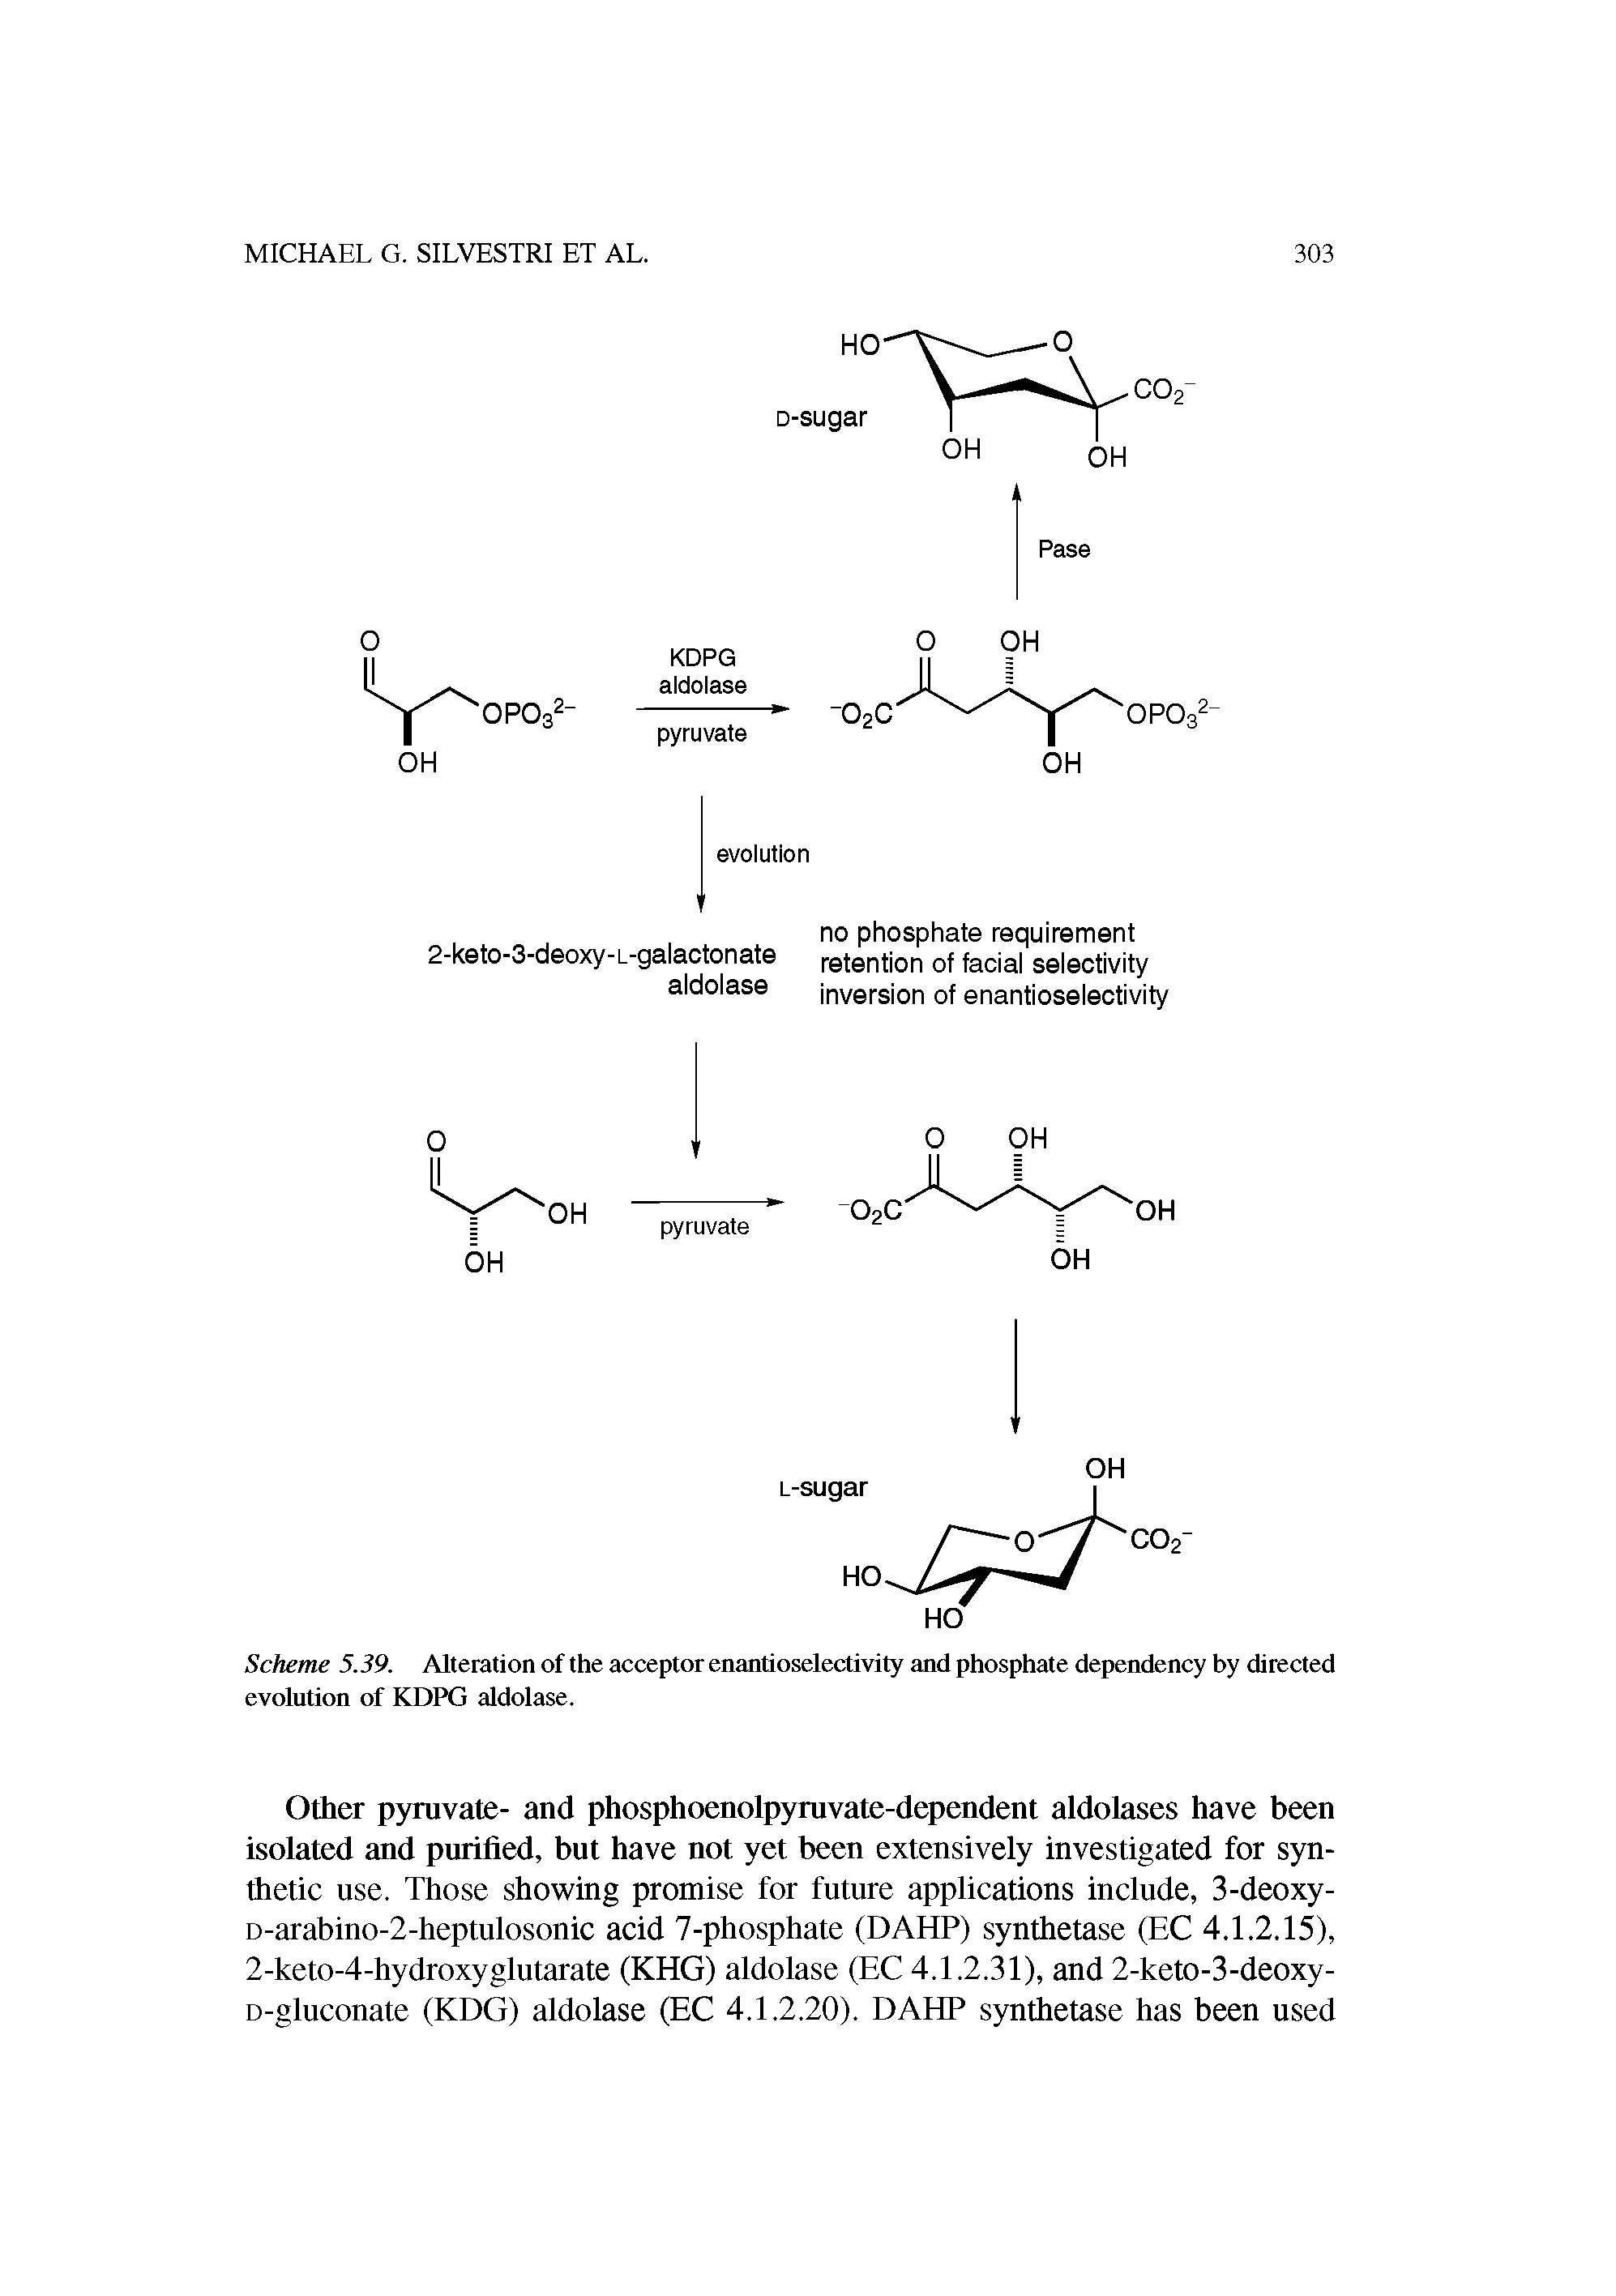 Scheme 5.39. Alteration of the acceptor enantioselectivity and phosphate dependency by directed evolution of KDPG aldolase.